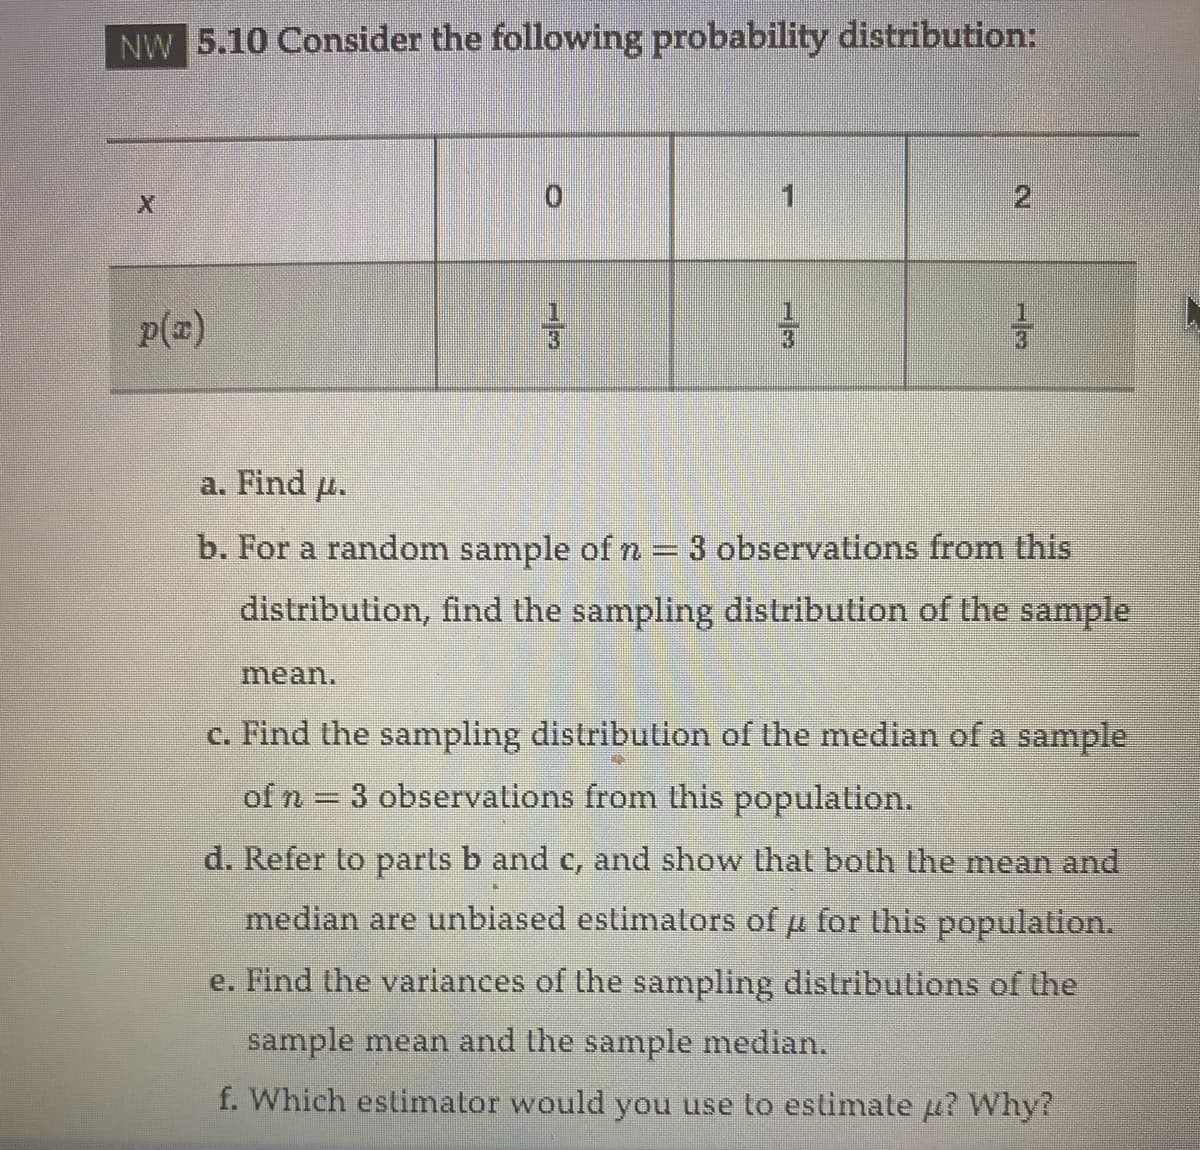 NW 5.10 Consider the following probability distribution:
p(x)
33
mean.
=
33
N
13
a. Find u.
b. For a random sample of n = 3 observations from this
distribution, find the sampling distribution of the sample
c. Find the sampling distribution of the median of a sample
of n = 3 observations from this population.
d. Refer to parts b and c, and show that both the mean and
median are unbiased estimators of μ for this population.
e. Find the variances of the sampling distributions of the
sample mean and the sample median.
f. Which estimator would you use to estimate μ? Why?